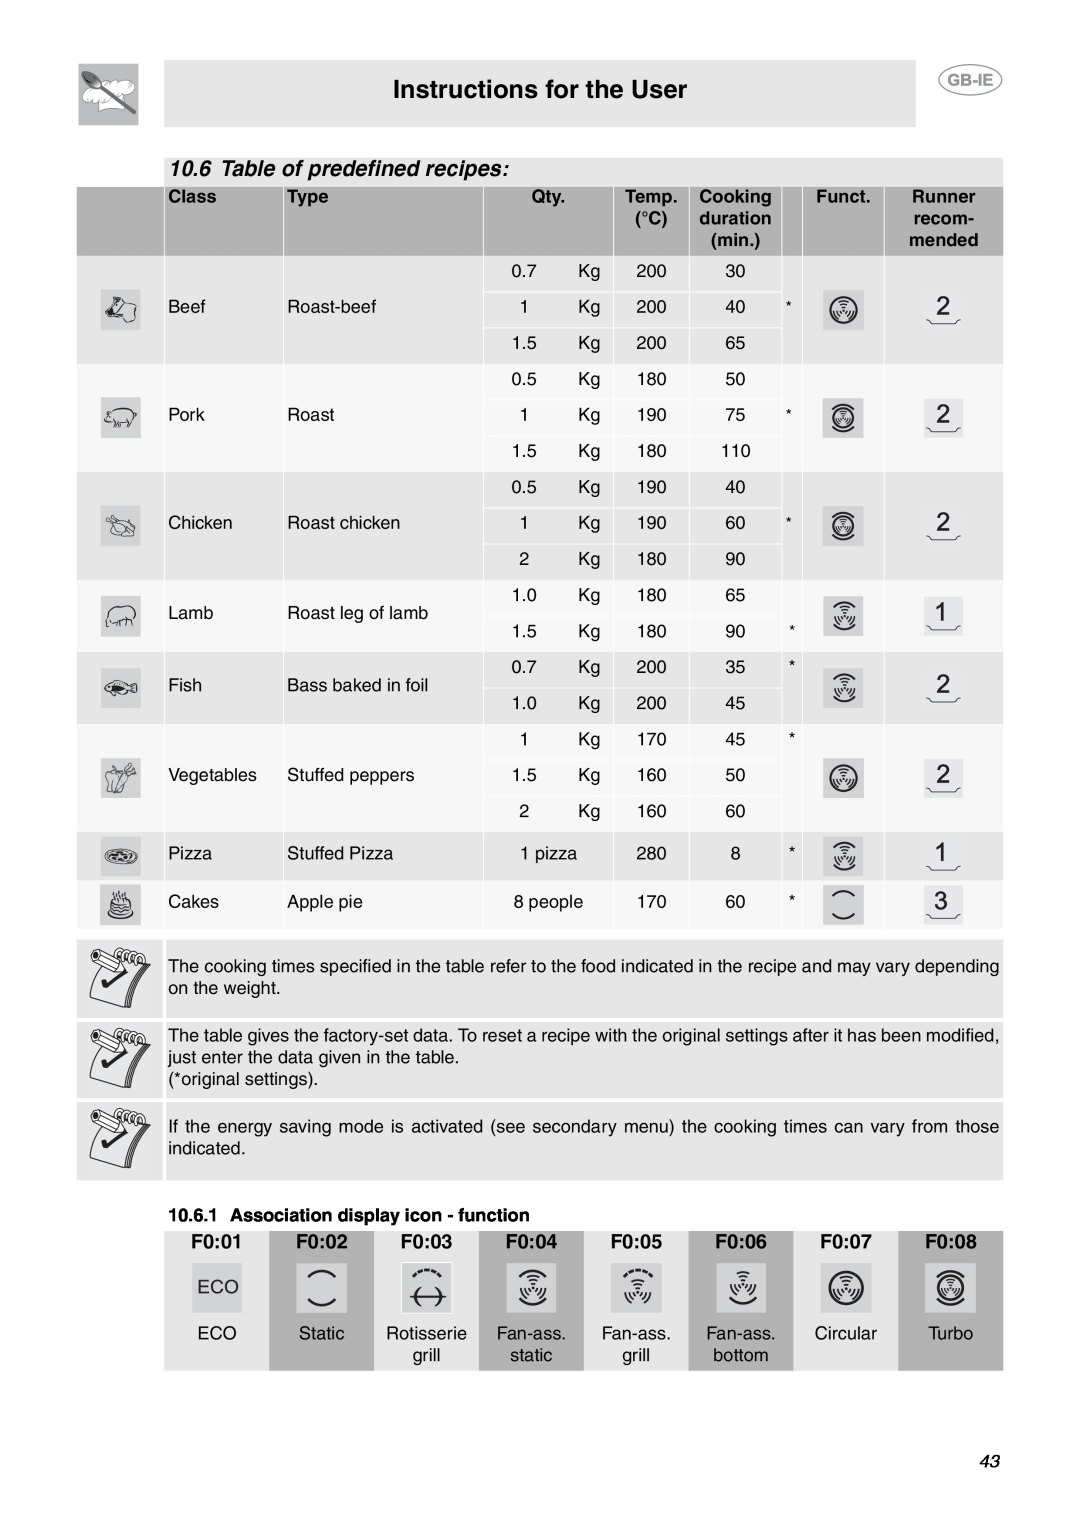 Smeg CE9IMX Table of predefined recipes, Instructions for the User, F001, F002, F003, F004, F005, F006, F007, F008, Class 